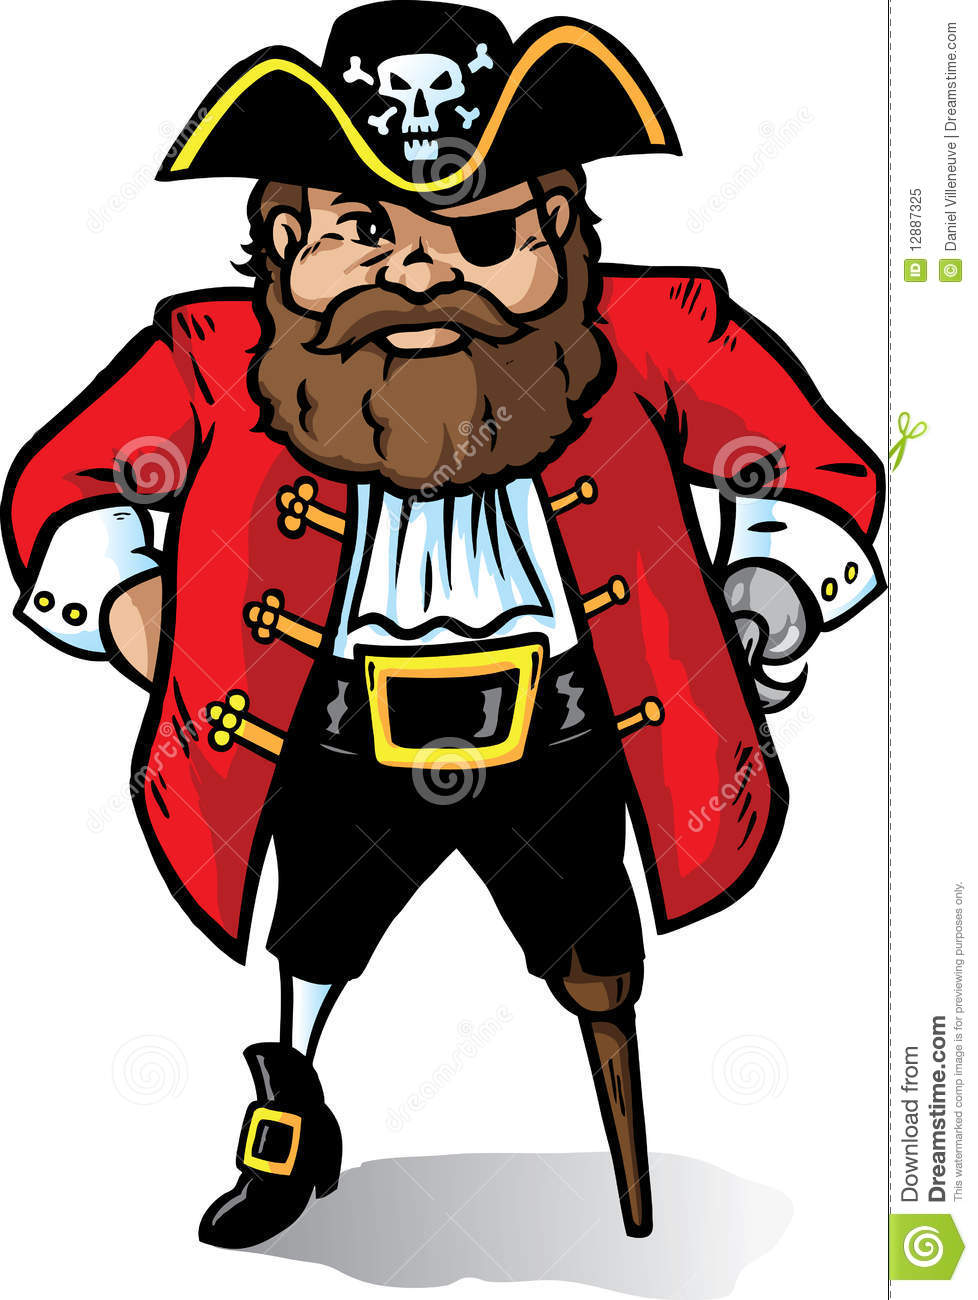 Cartoon Pirate Captain Looking Very Angry  Part Of A Series 